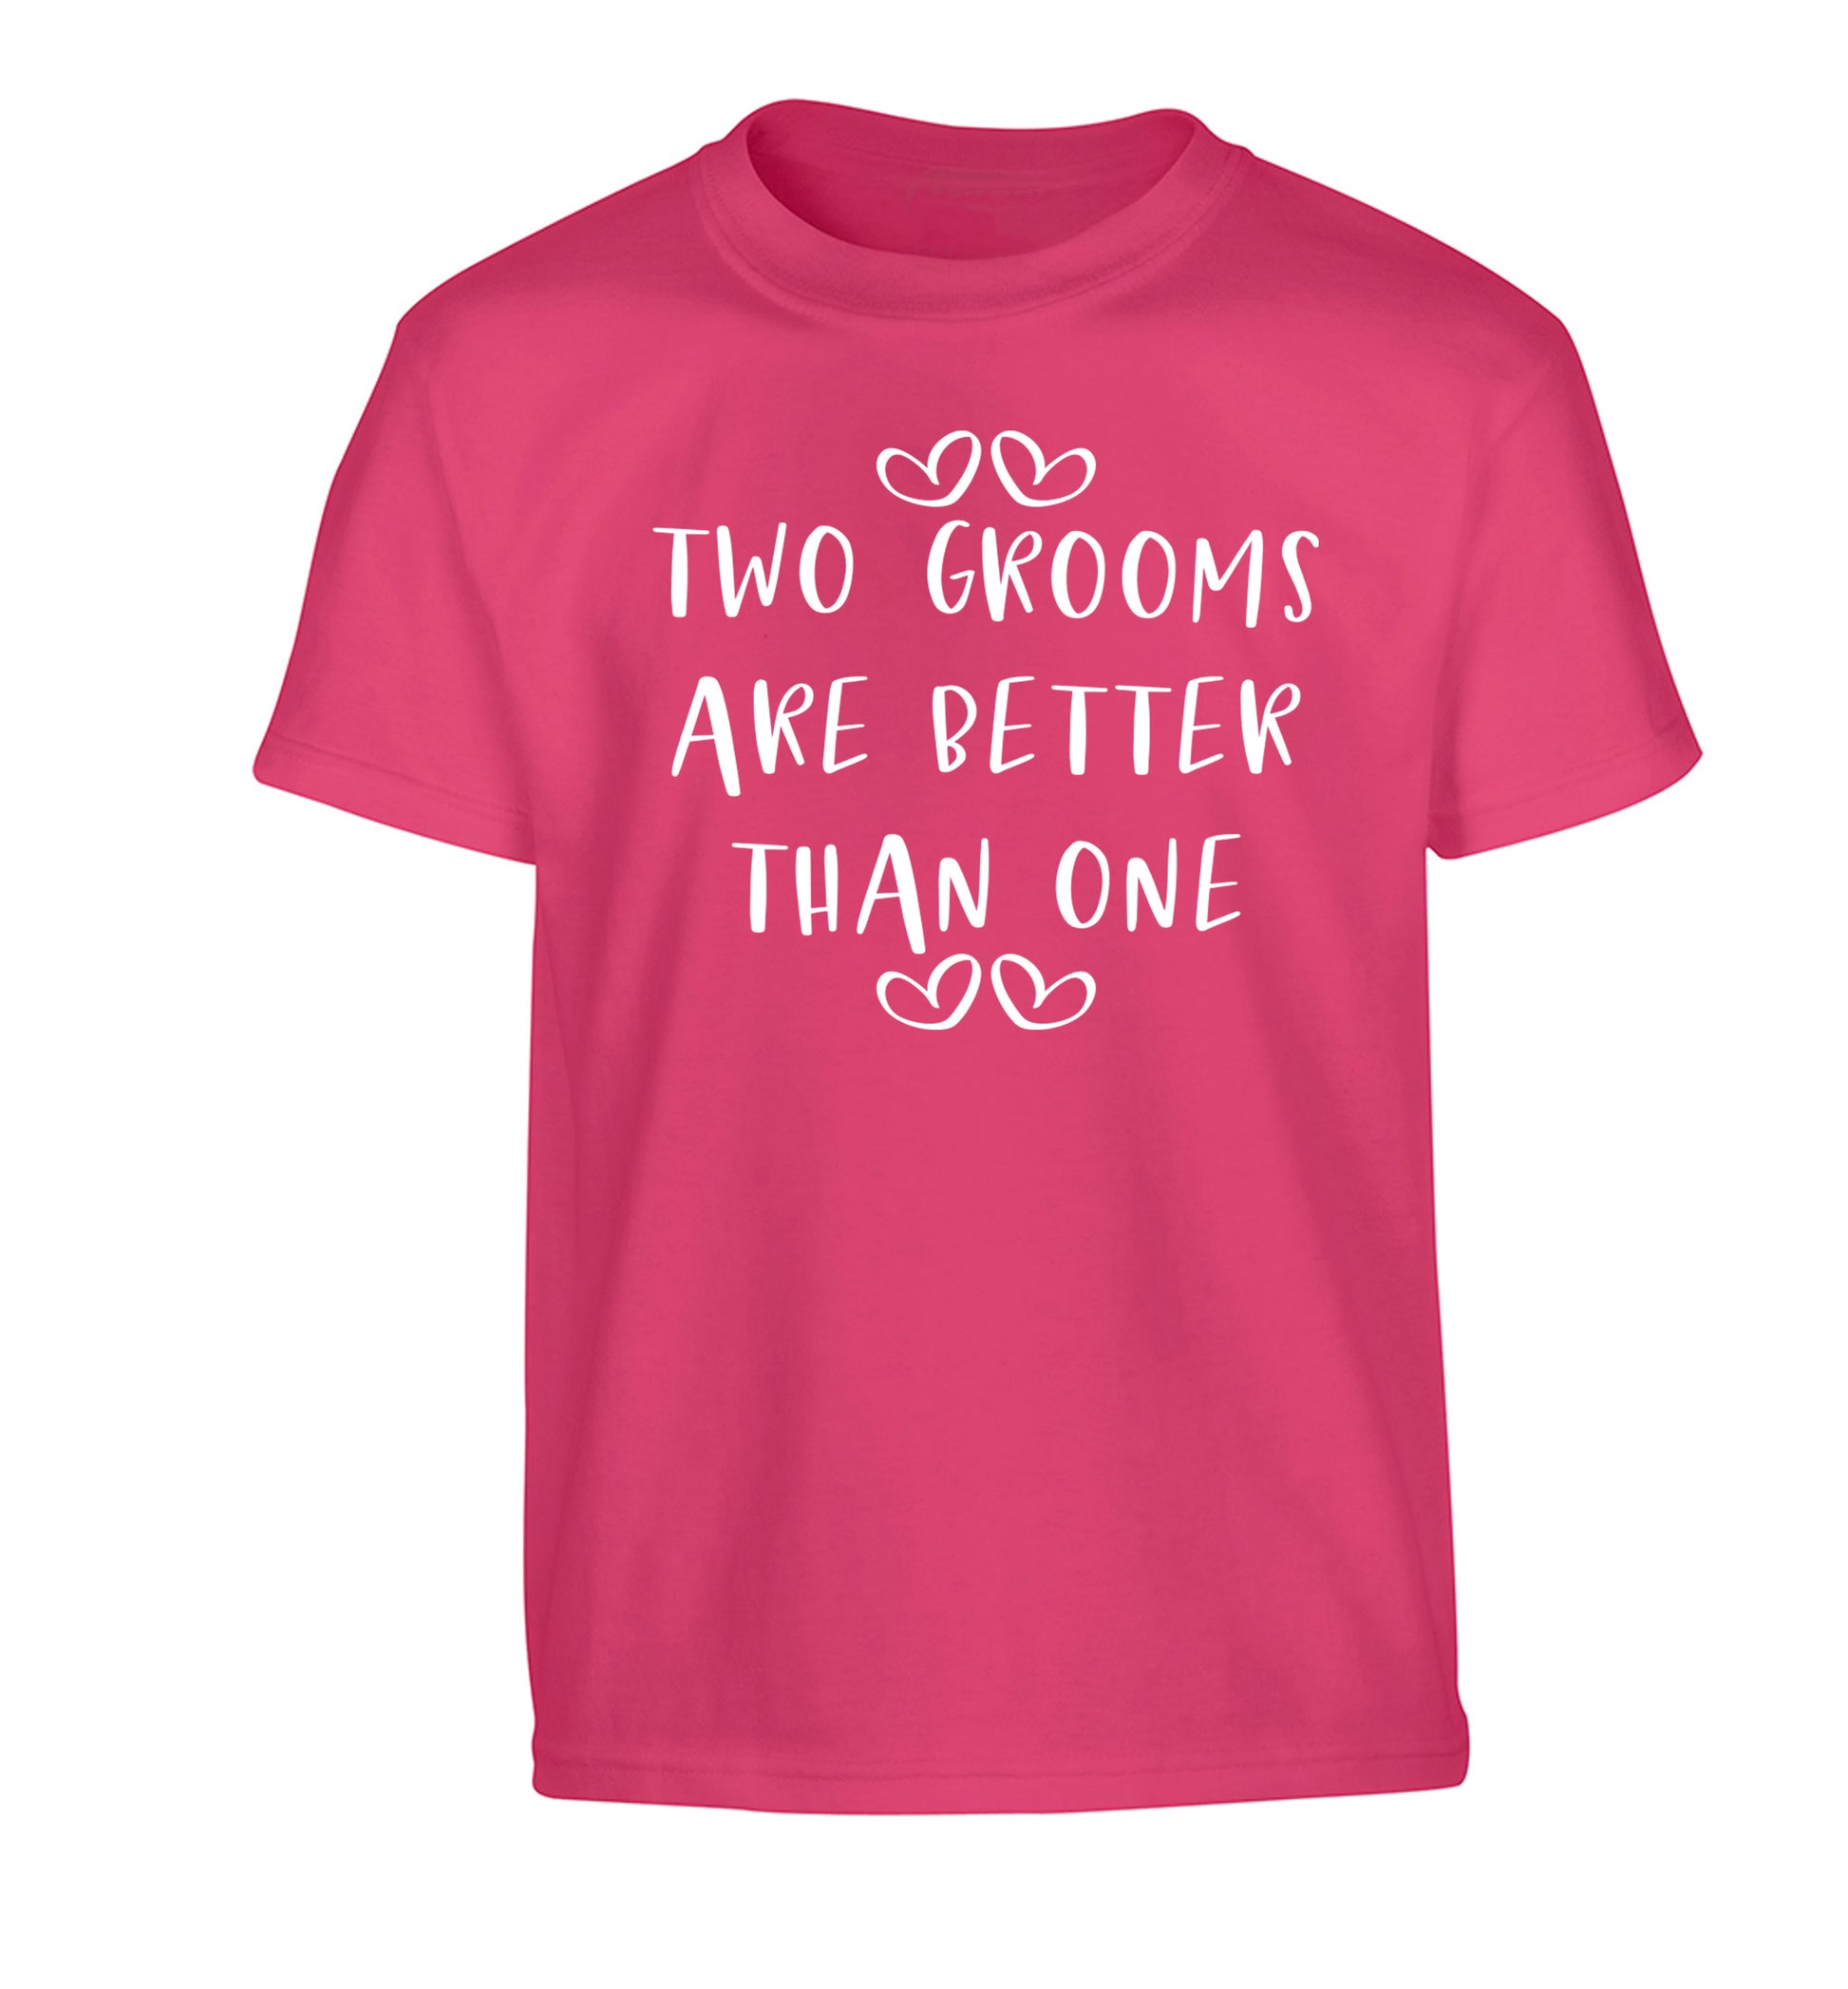 Two grooms are better than one Children's pink Tshirt 12-13 Years